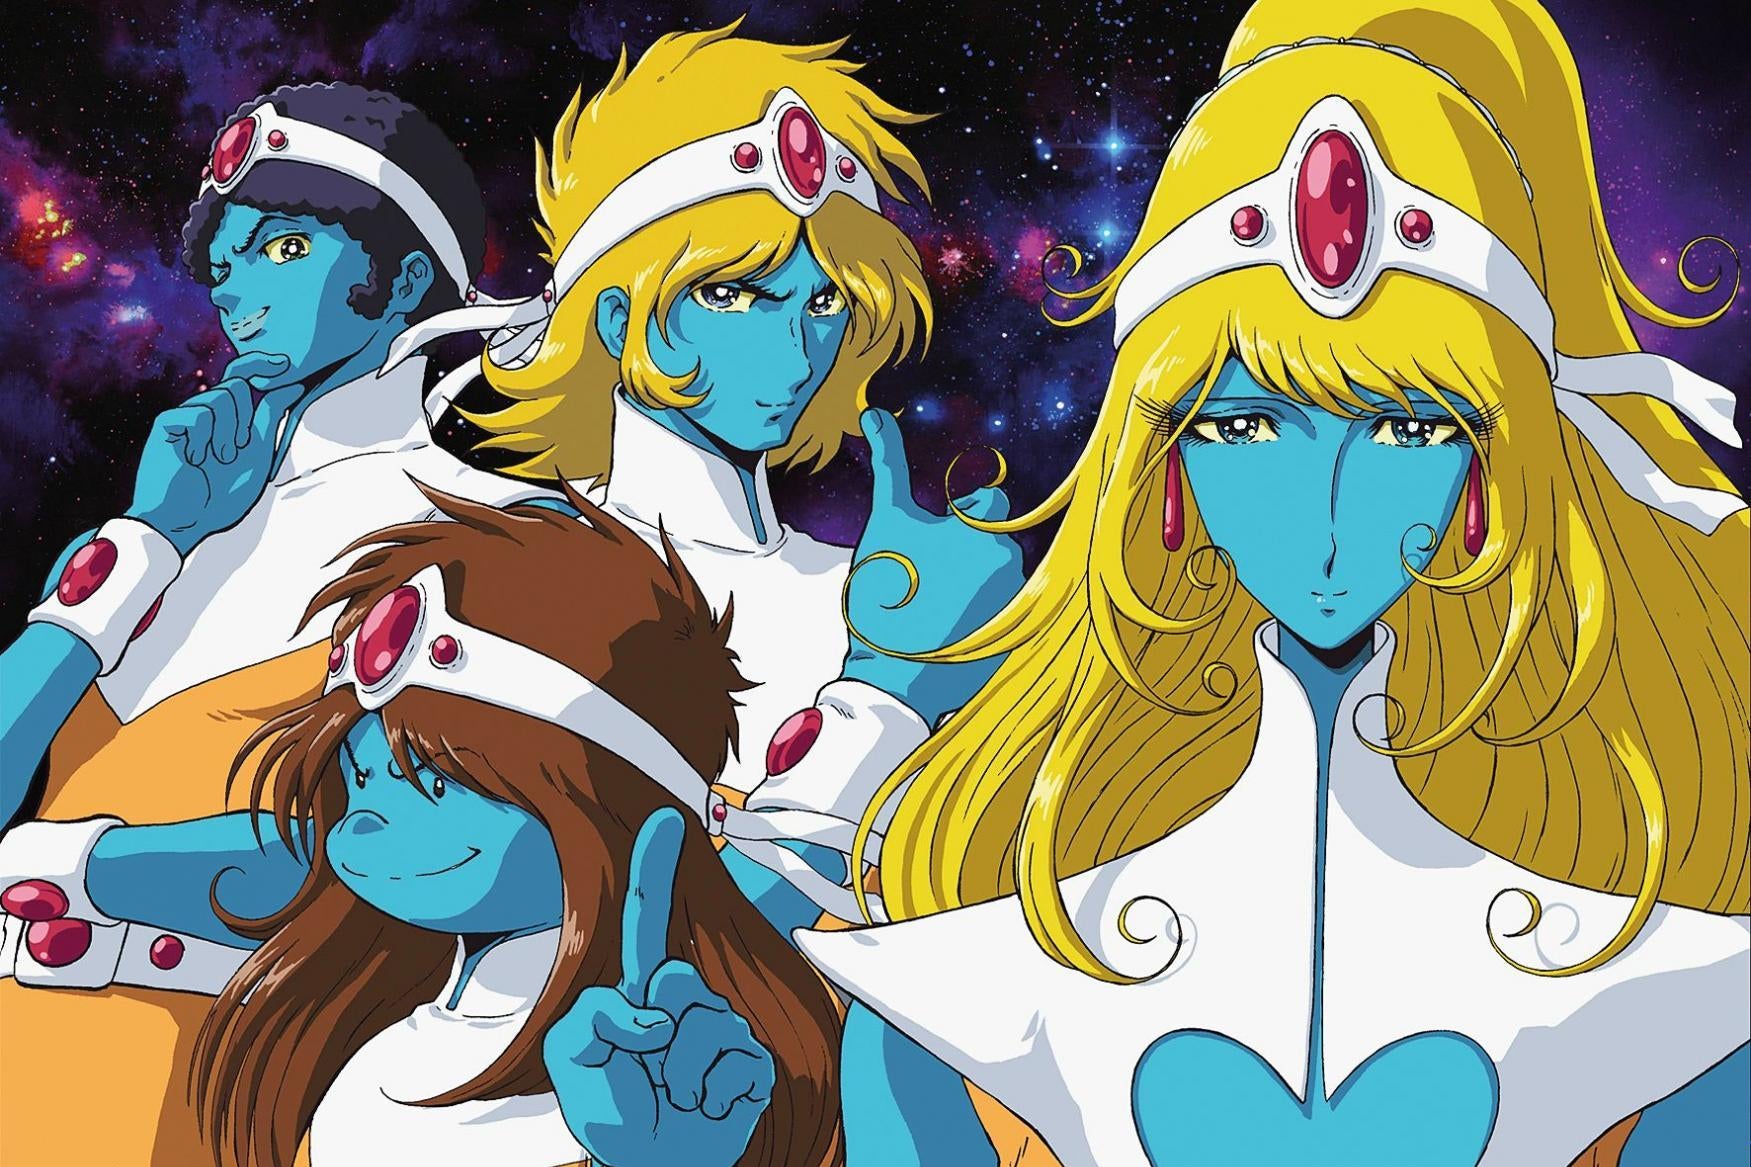 A group of four characters stand together. They have blue skin and wear white costumes. Two are blond, and two have brown hair. 